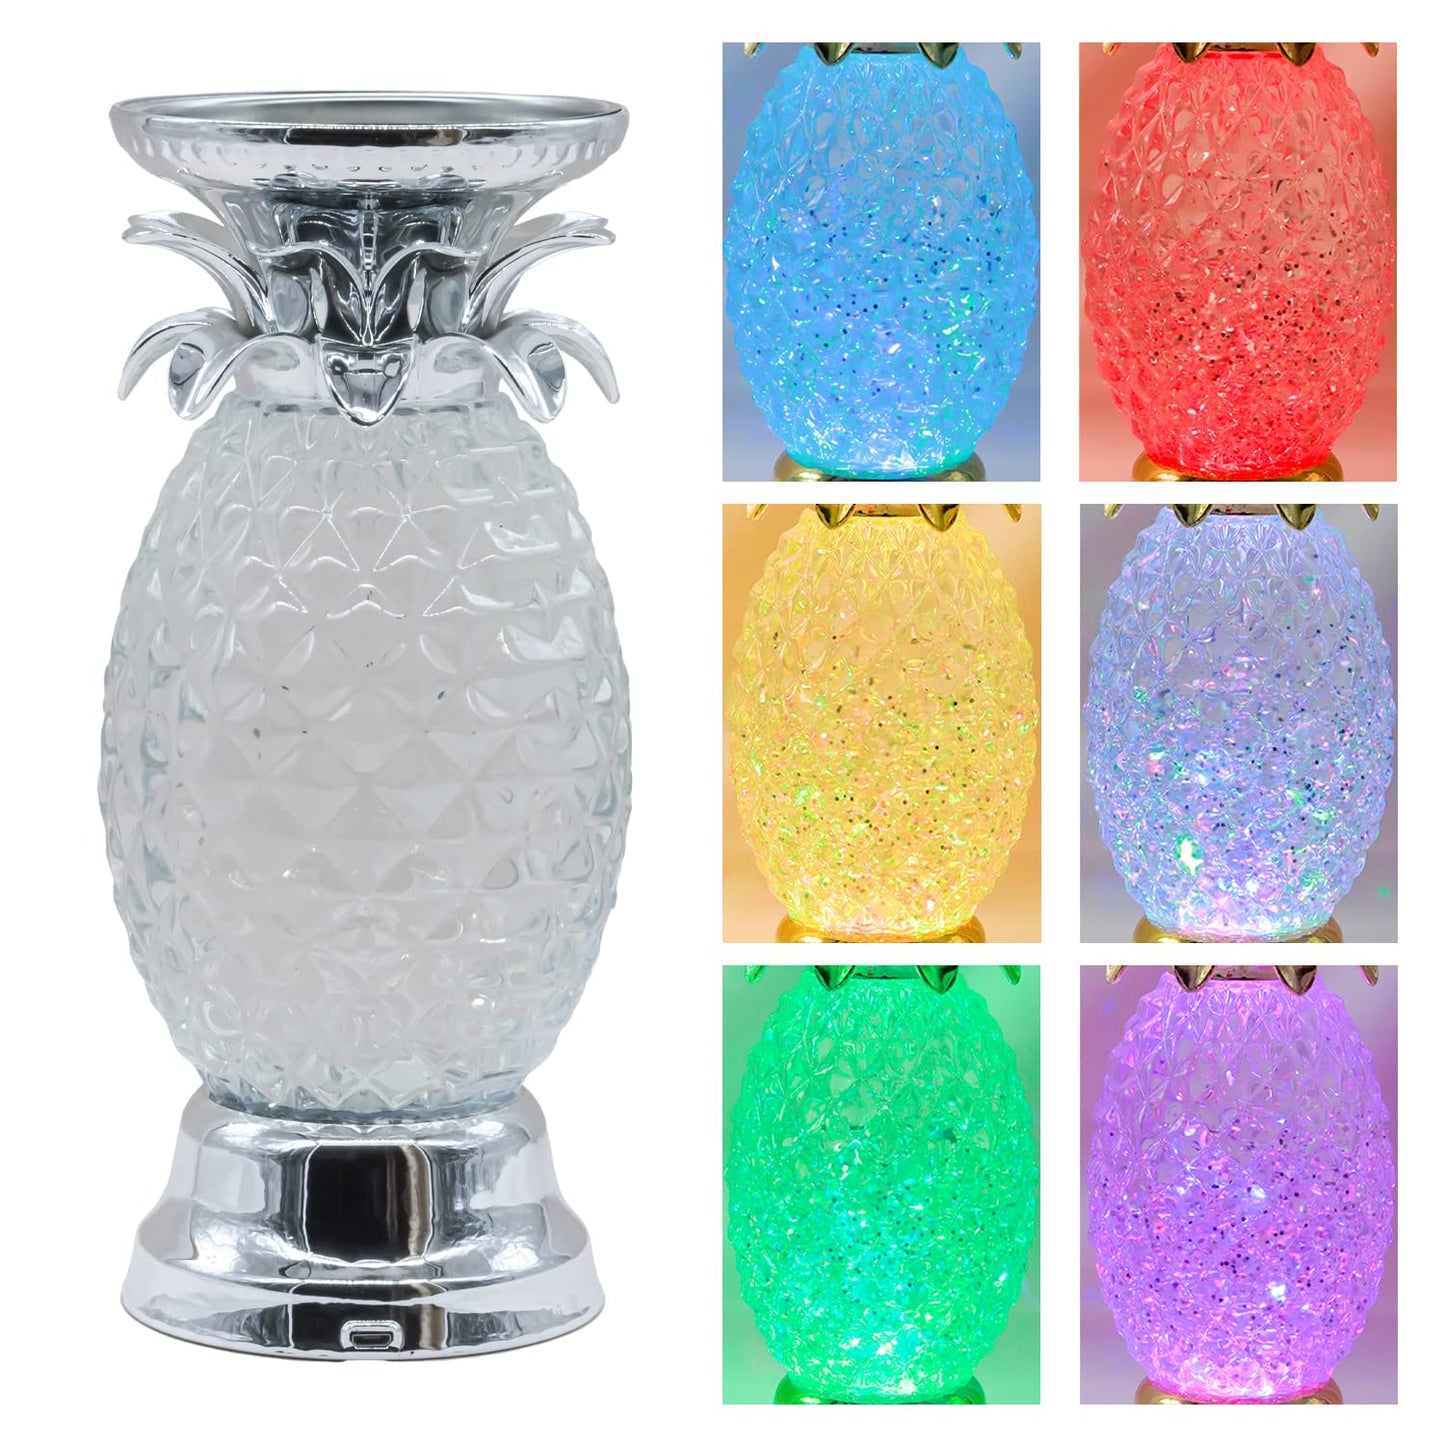 YAKii 9.5" Pineapple LED Color Changing Shine Candle Holder,Swirling Water Waves Lamp Kid Safe Battery/USB Cable Operated,Table Lamp Candle Holder Table Decoration Silver(Pack of 2)